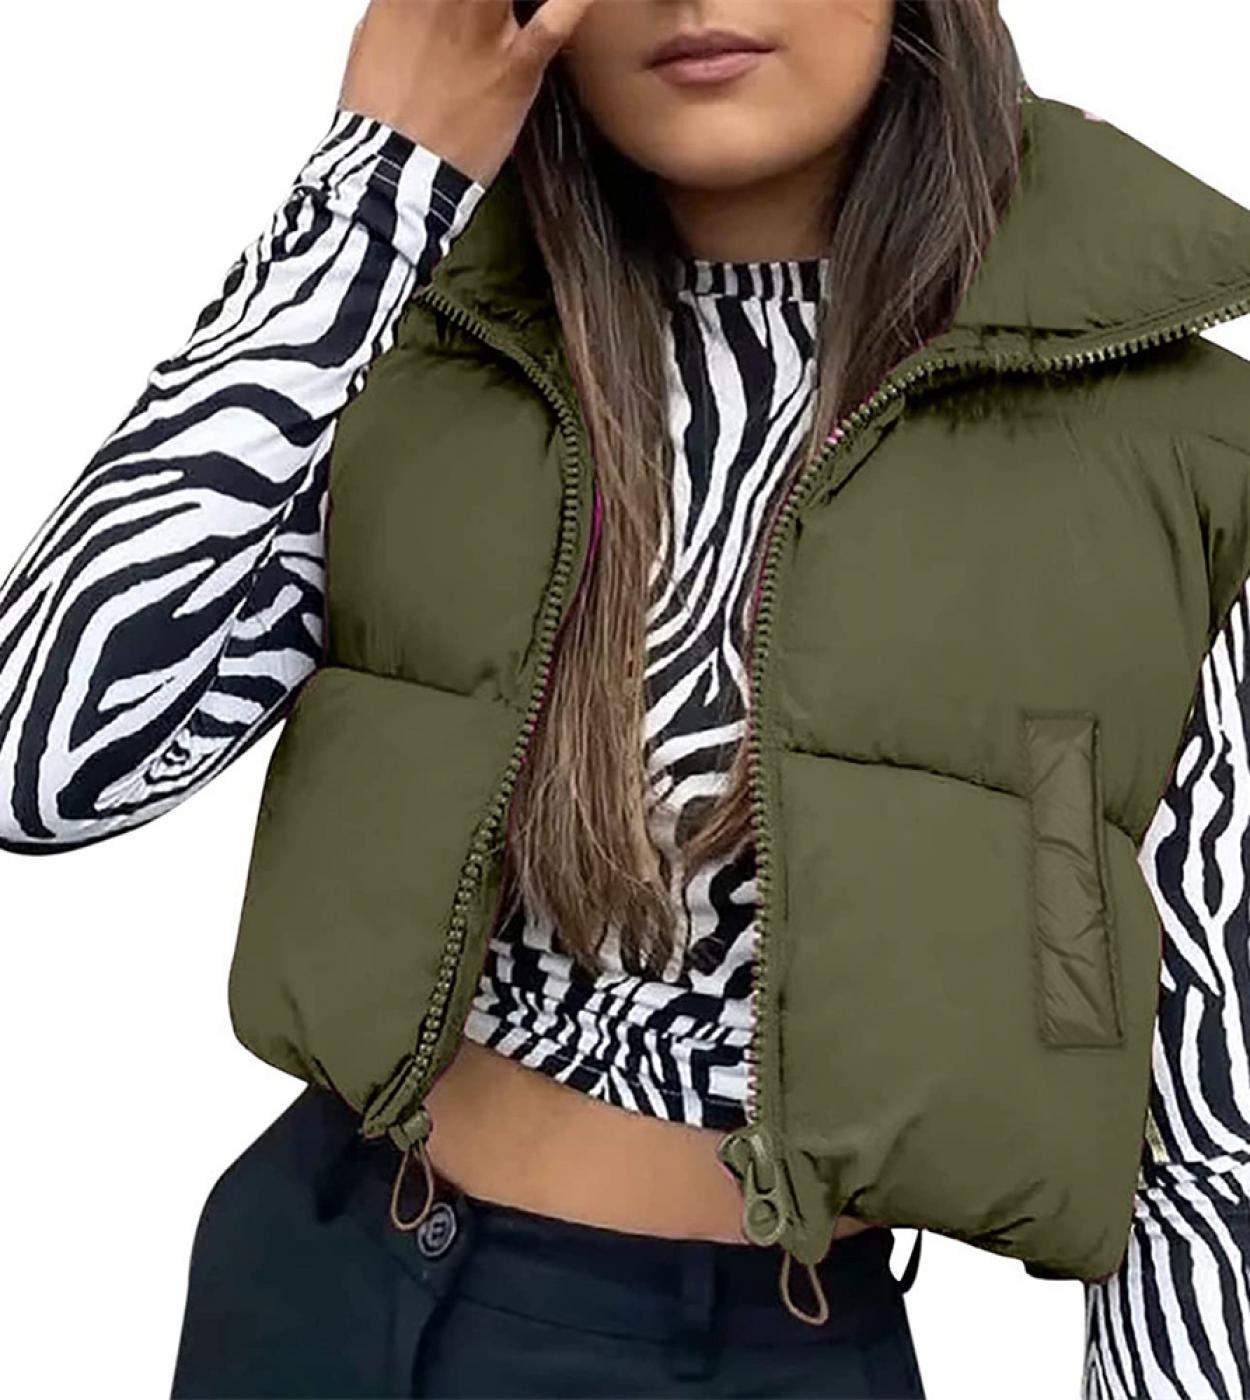 Tetyseysh Women High Neck Cropped Waistcoat Hot Lightweight Puffer Vest Chic Lady Sleeveless Solid Color Warm Jackets Ou